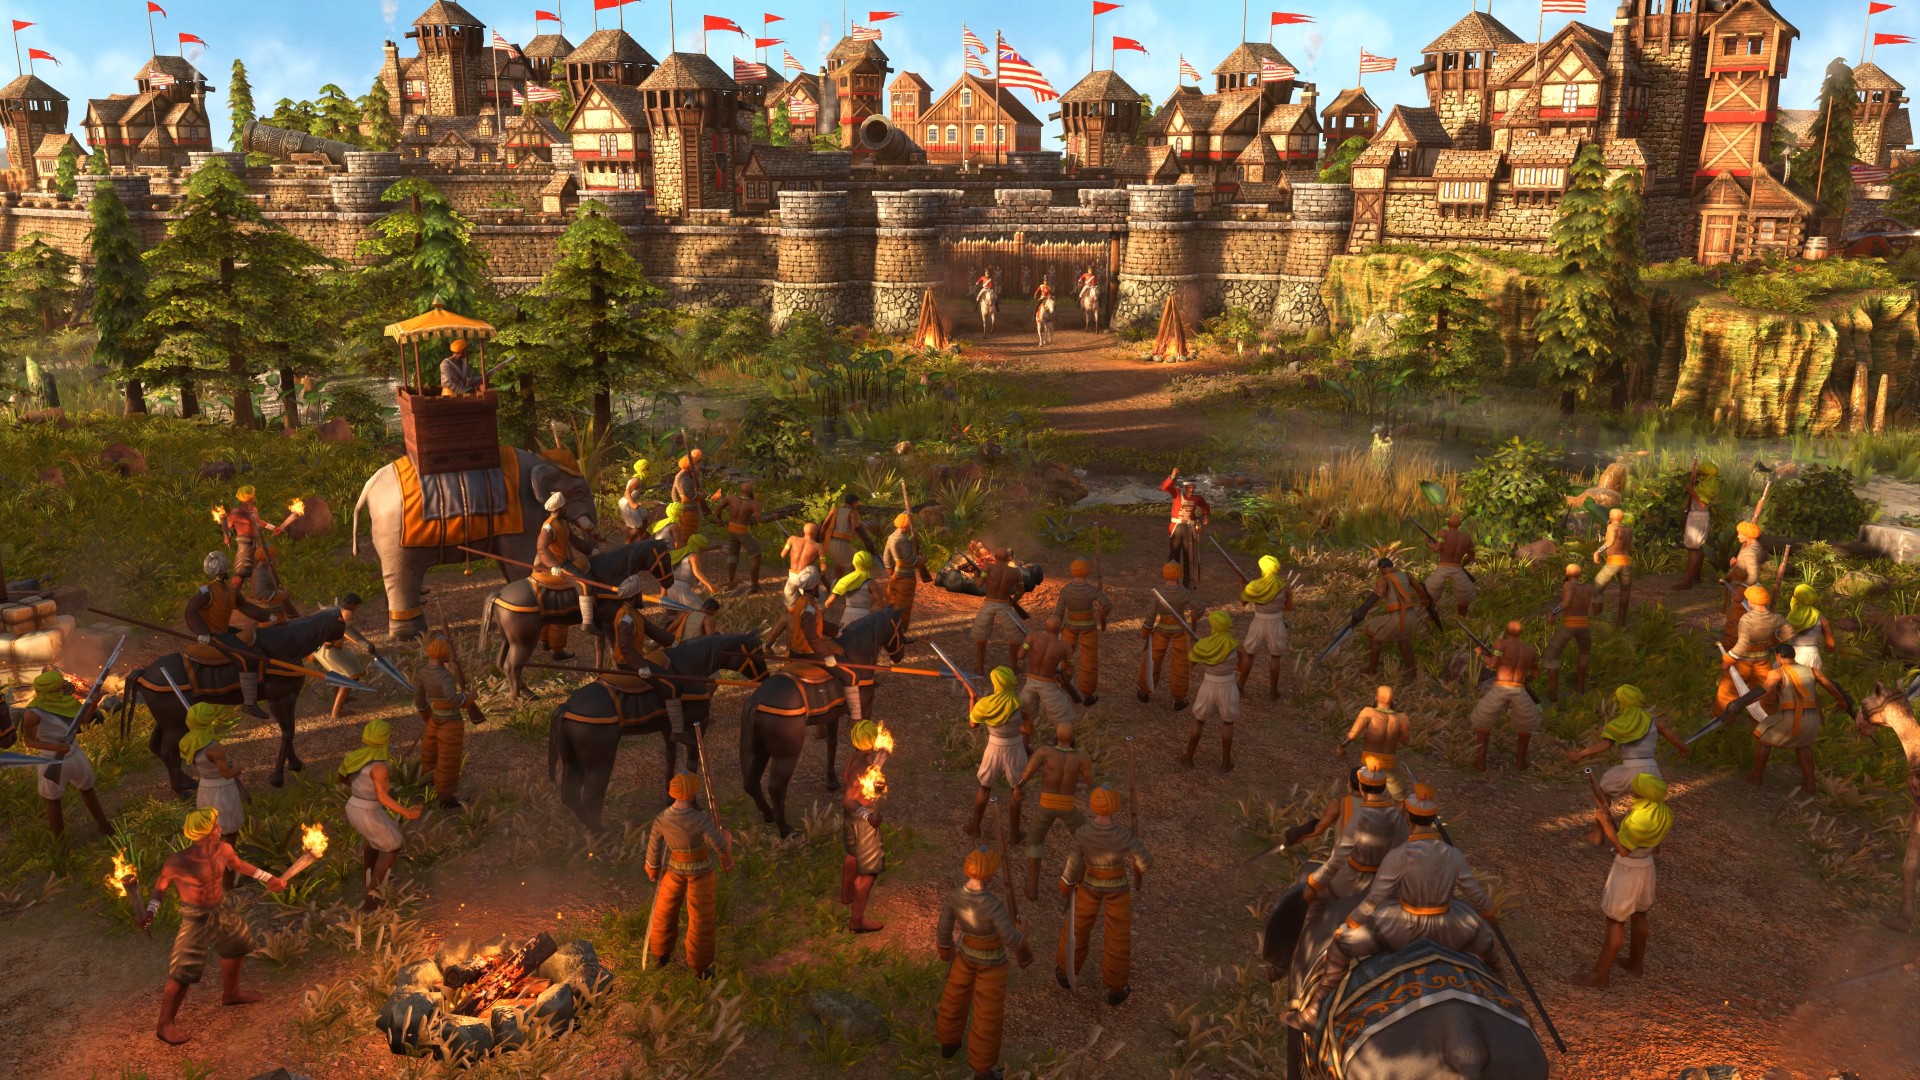 Age of Empires III: Definitive Edition